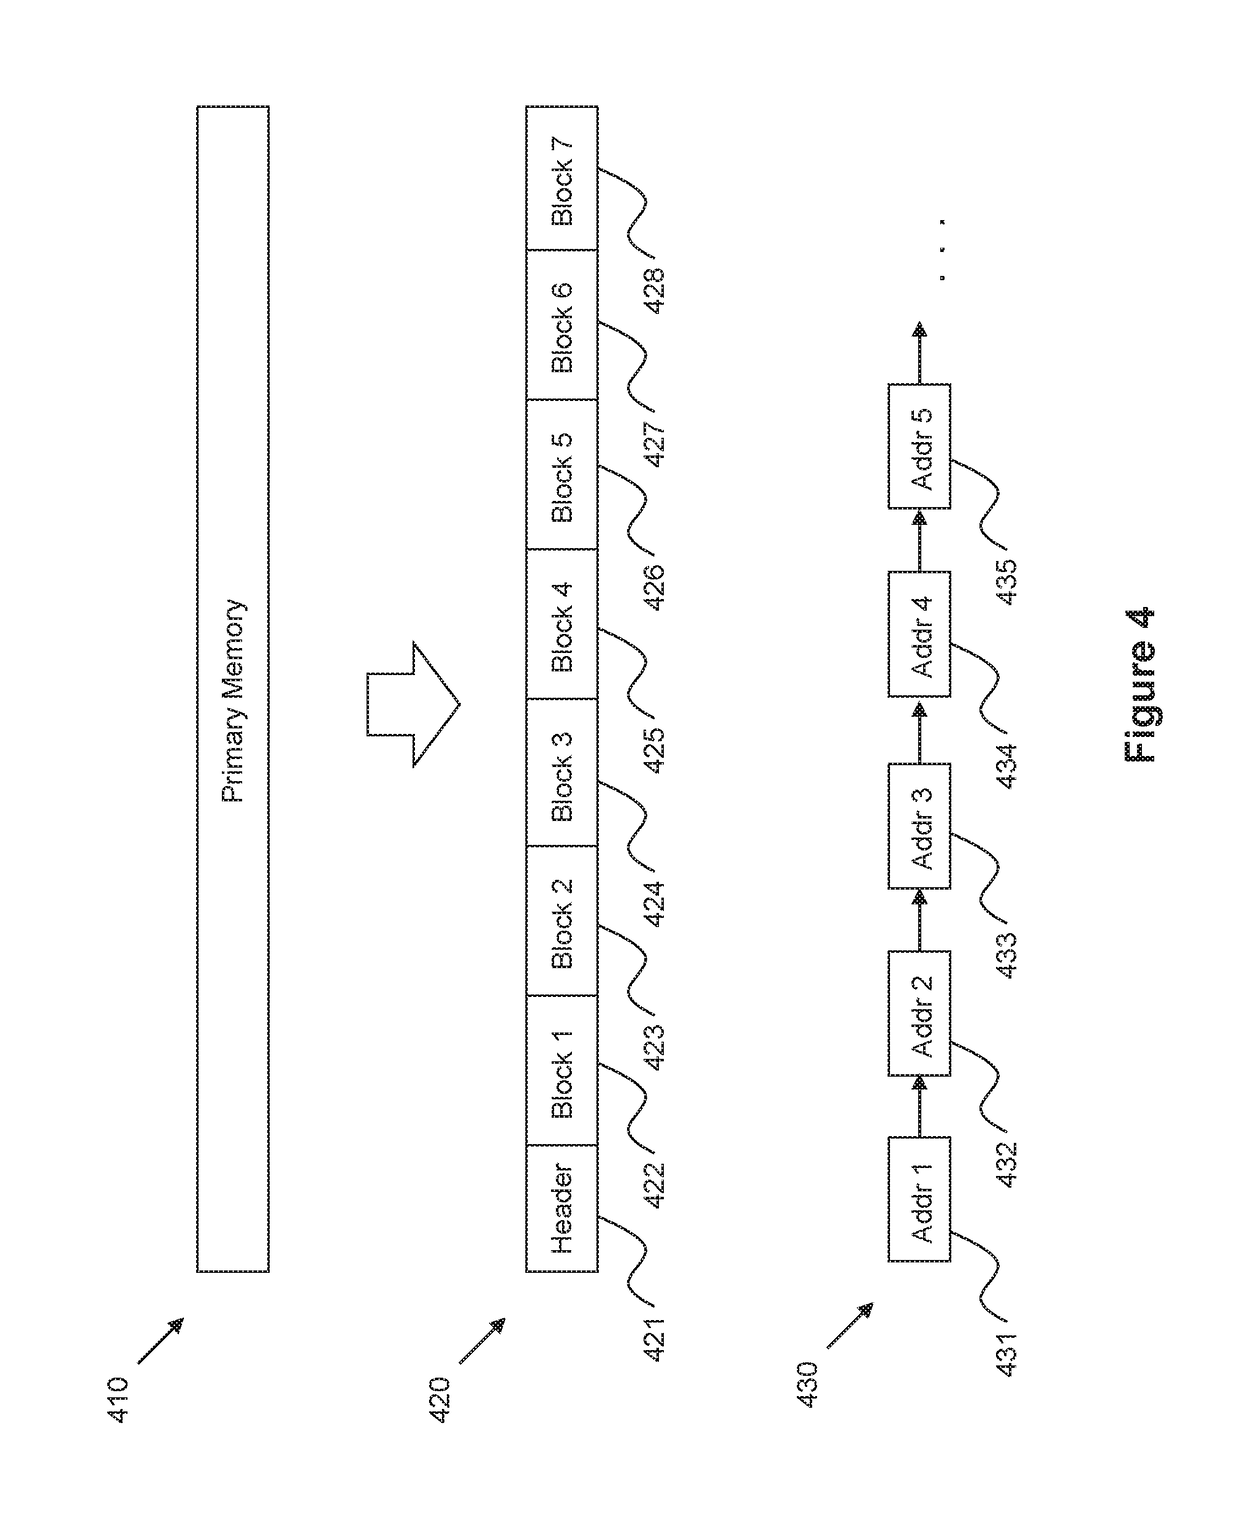 Embedded resilient distributed dataset systems and methods